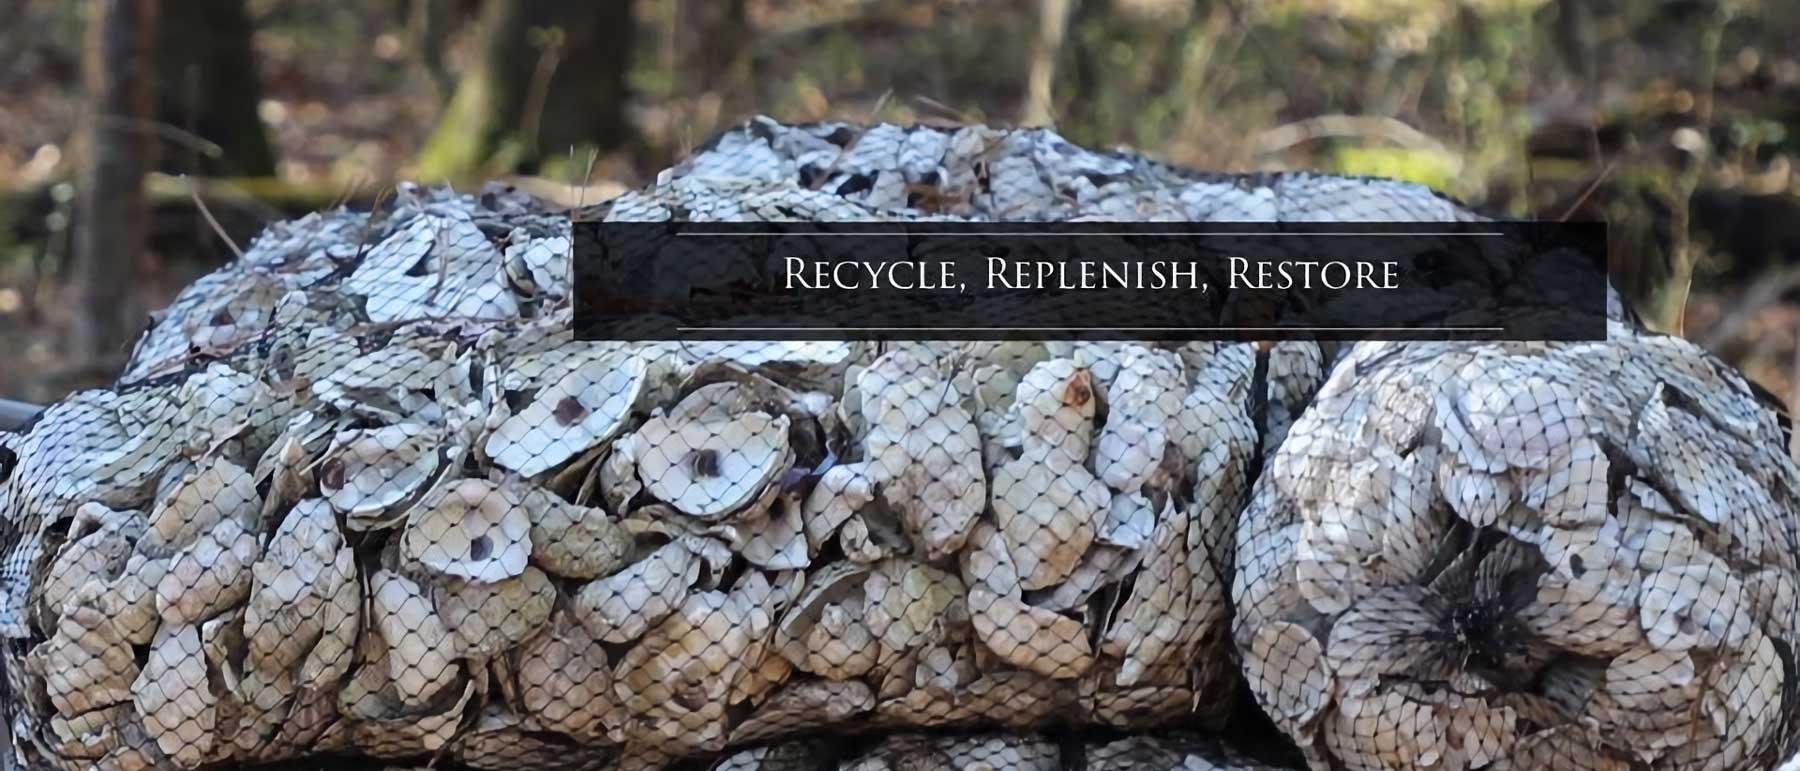 recycle, replenish and restore oysters